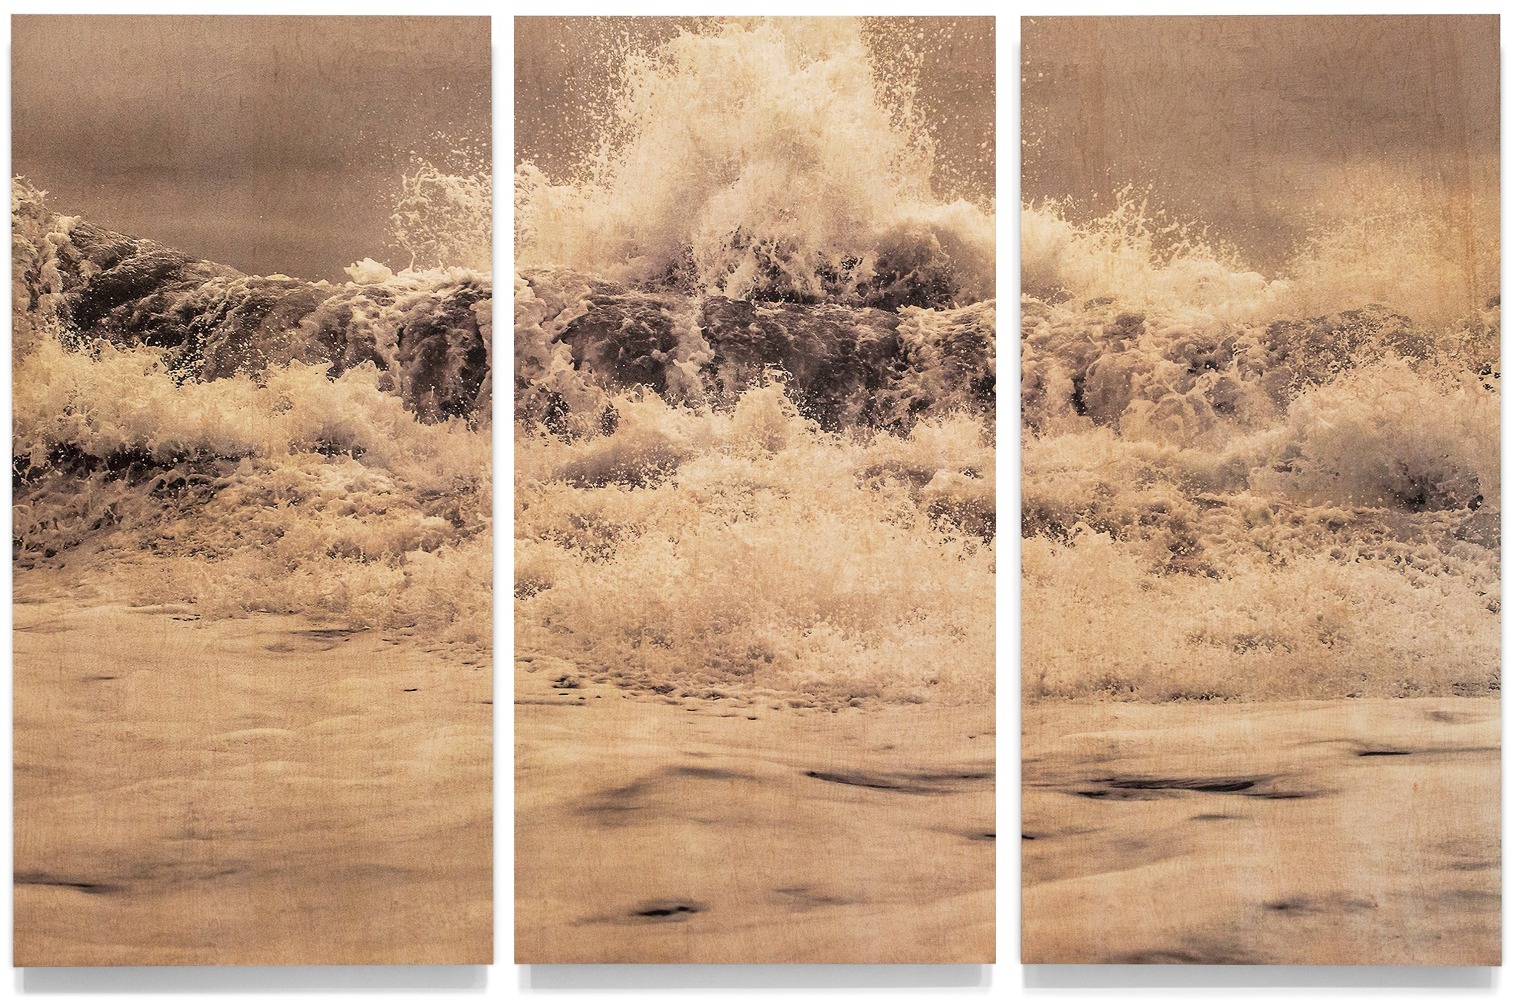 Wood Wave LIV, triptych

UV cured ink on maple veneer 74 &amp;times; 114&amp;quot;, three panels, 74 &amp;times; 37&amp;quot; (panel size) 2015

UV cured ink on maple veneer 148 x 225&amp;quot;, three panels, 148 x 74&amp;quot; (panel size) 2017